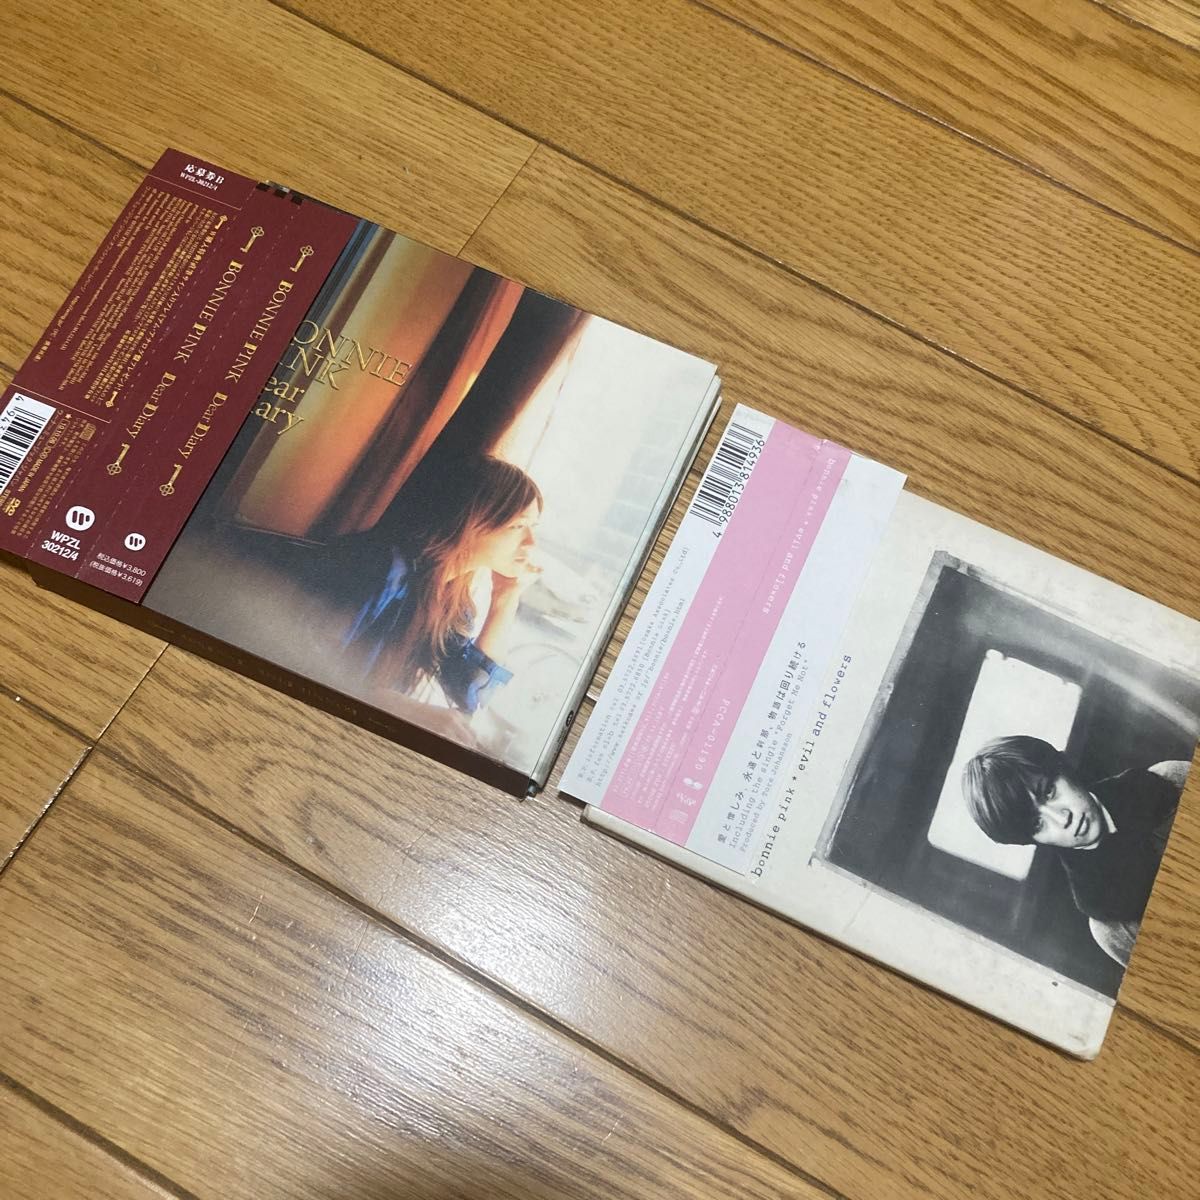 Bonnie Pink Dear Diary 初回限定盤 2CD＋1DVD evil and flowers 2タイトルまとめ